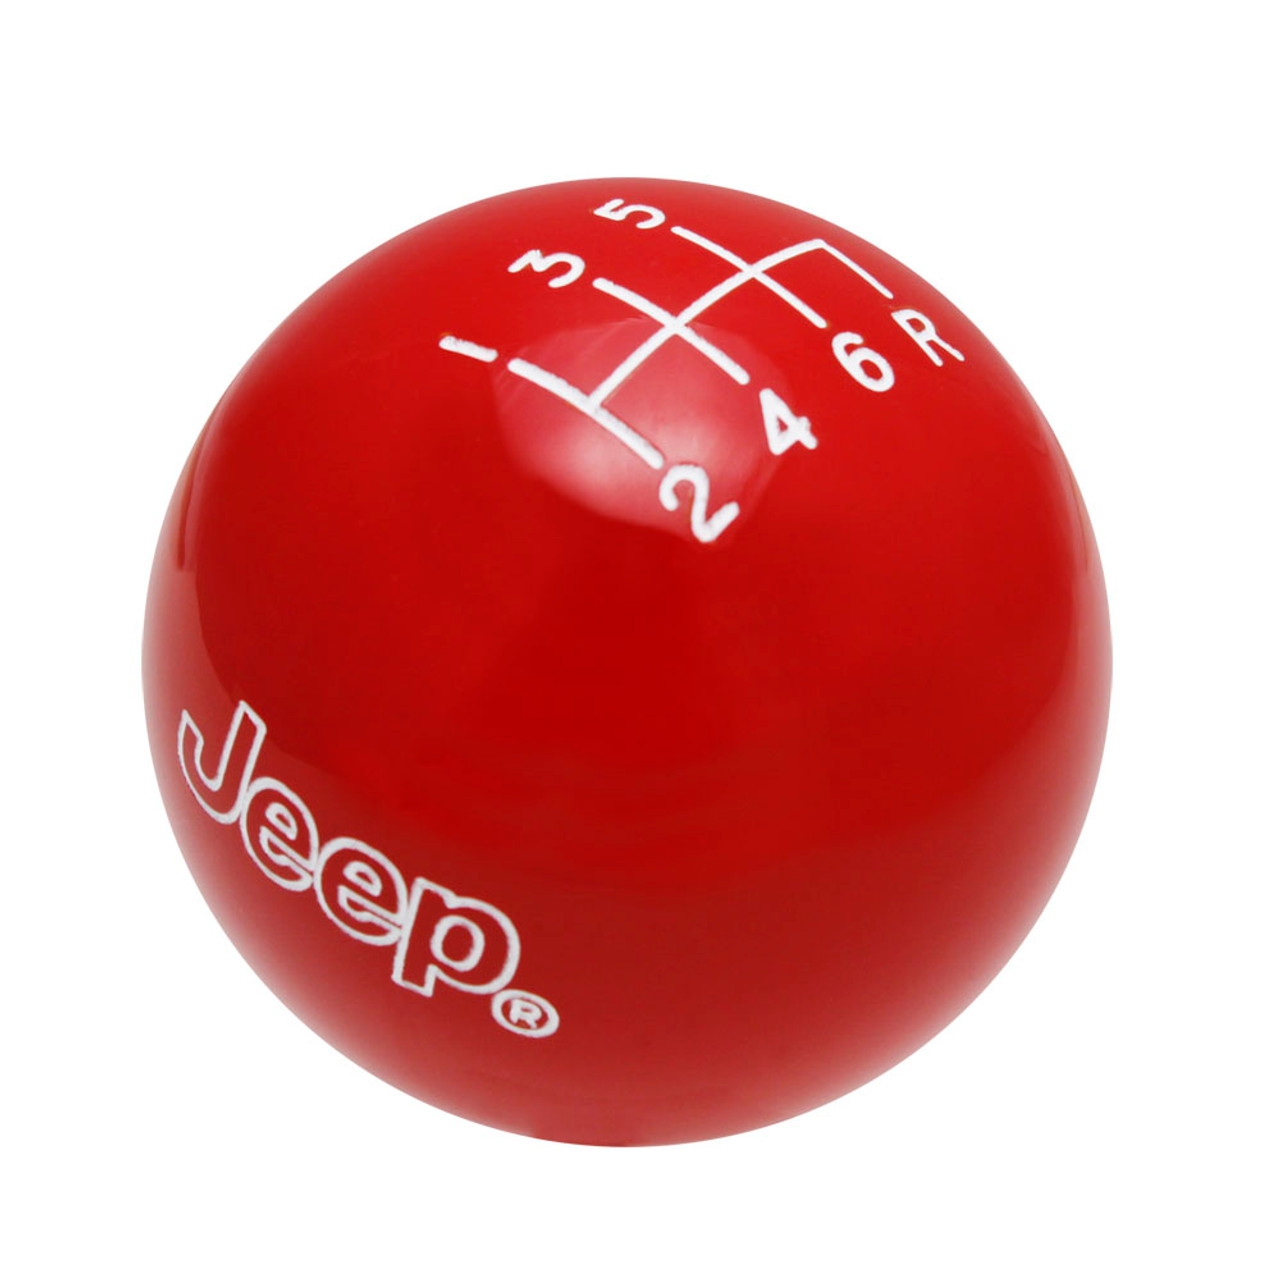 Red knob with White graphics